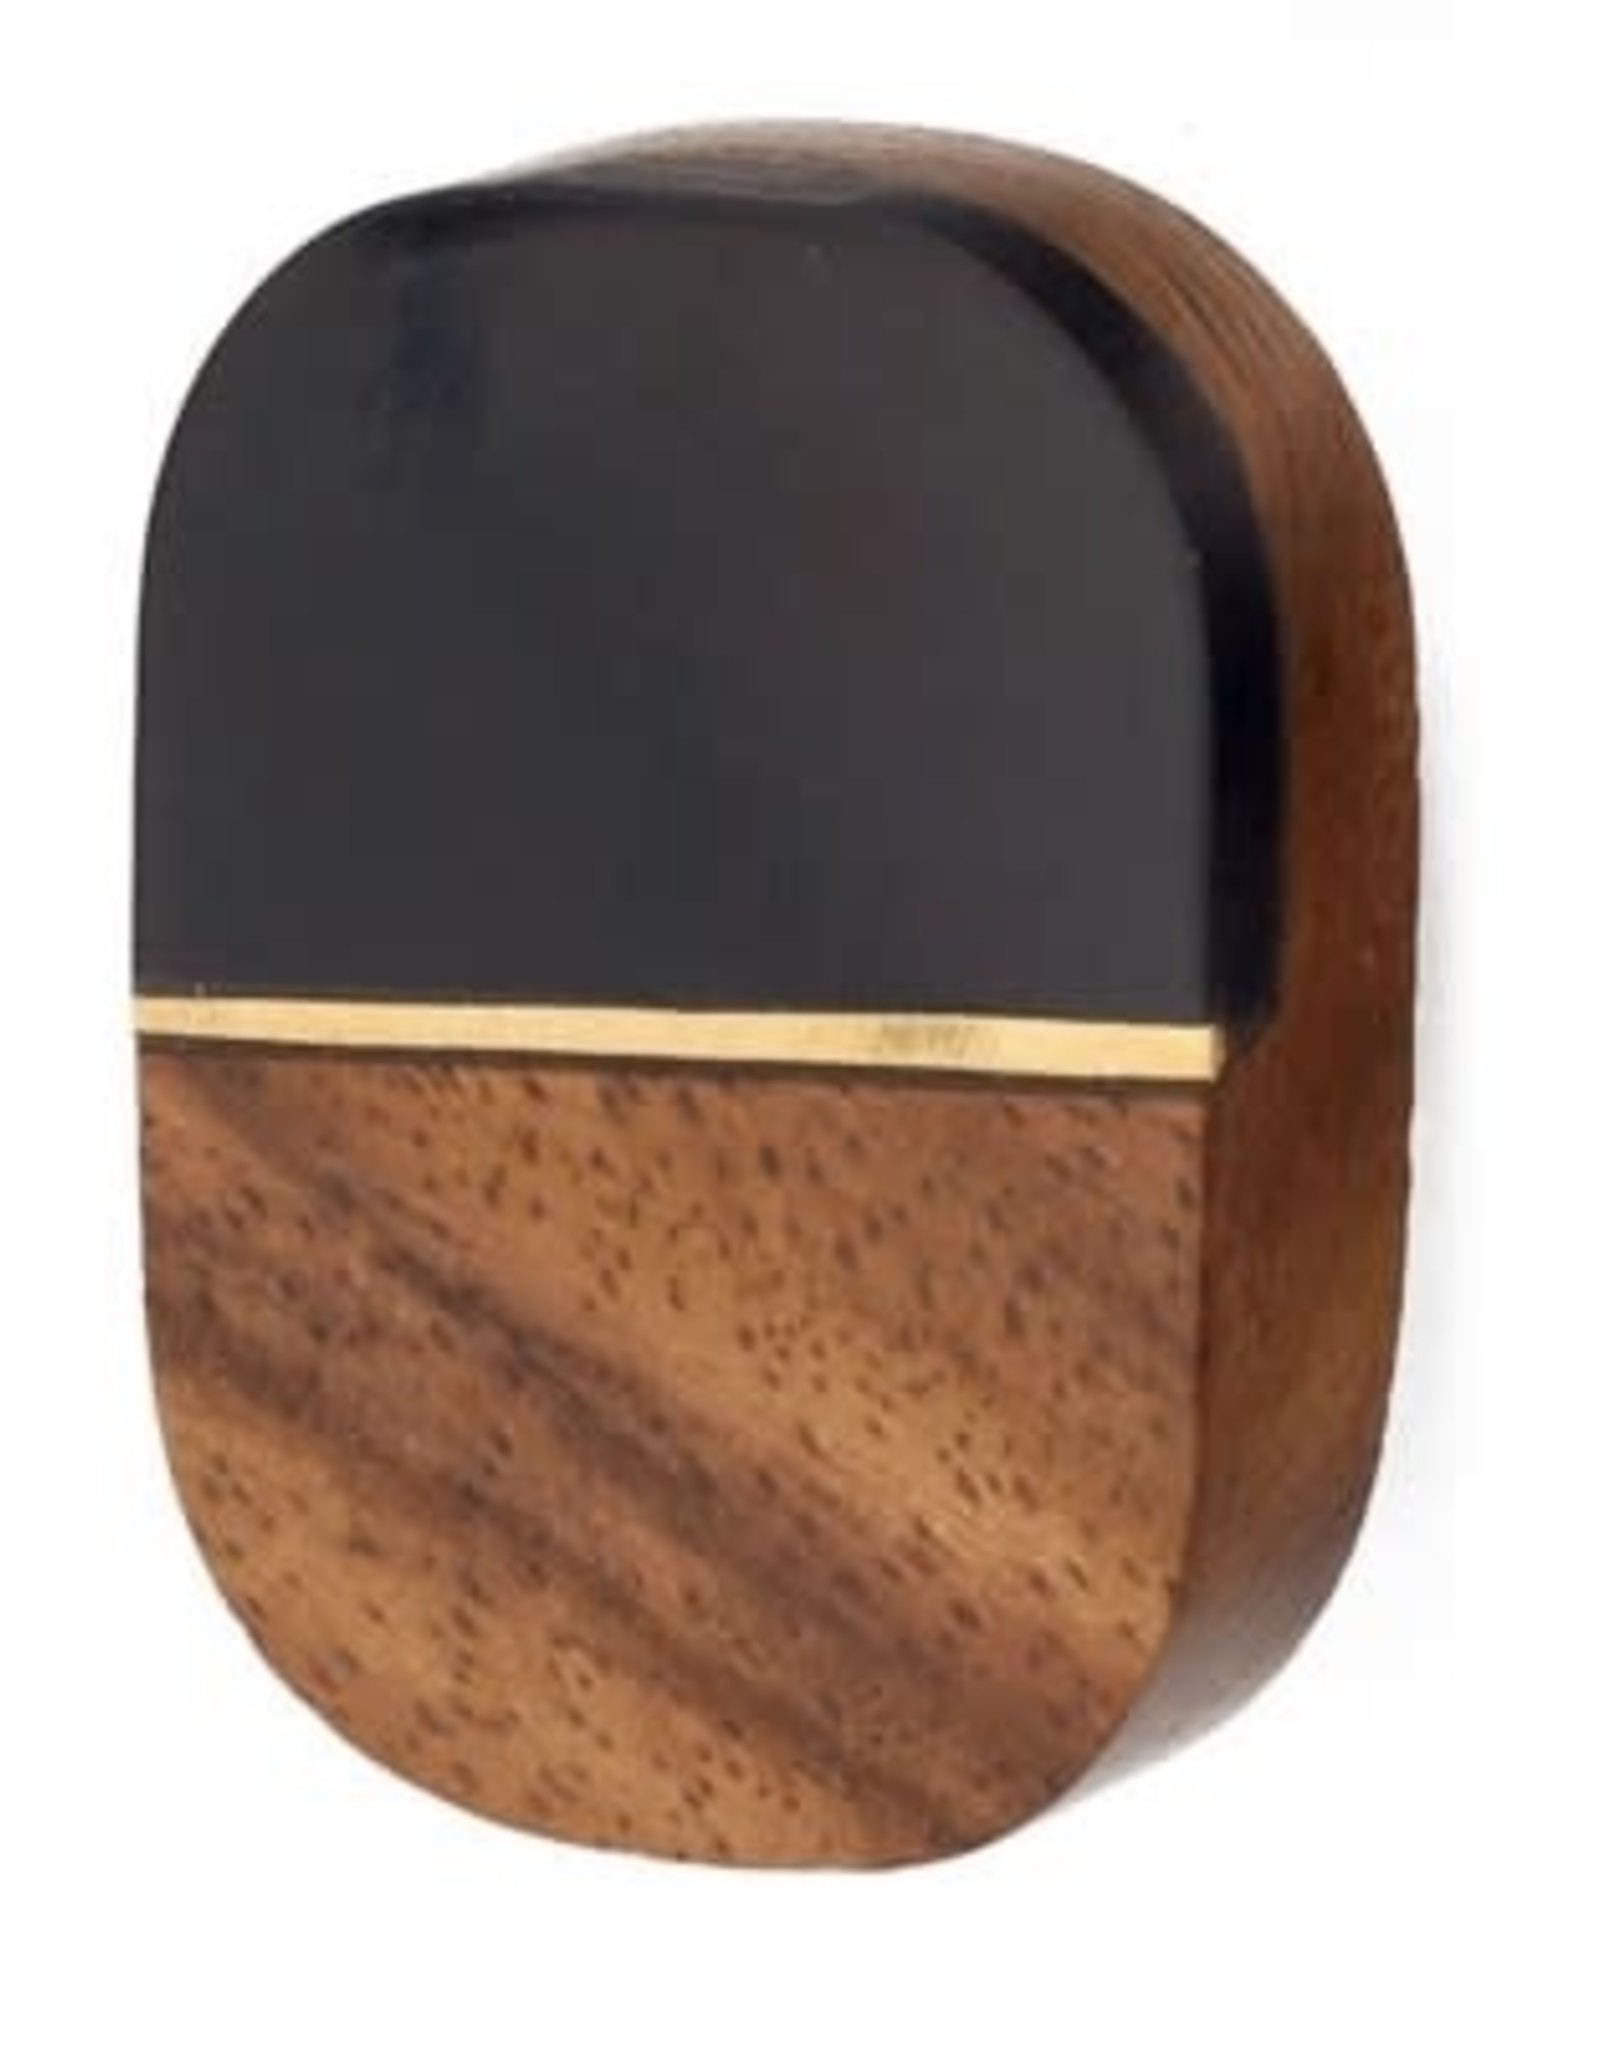 Brown / Black Oval Knob with Gold Line